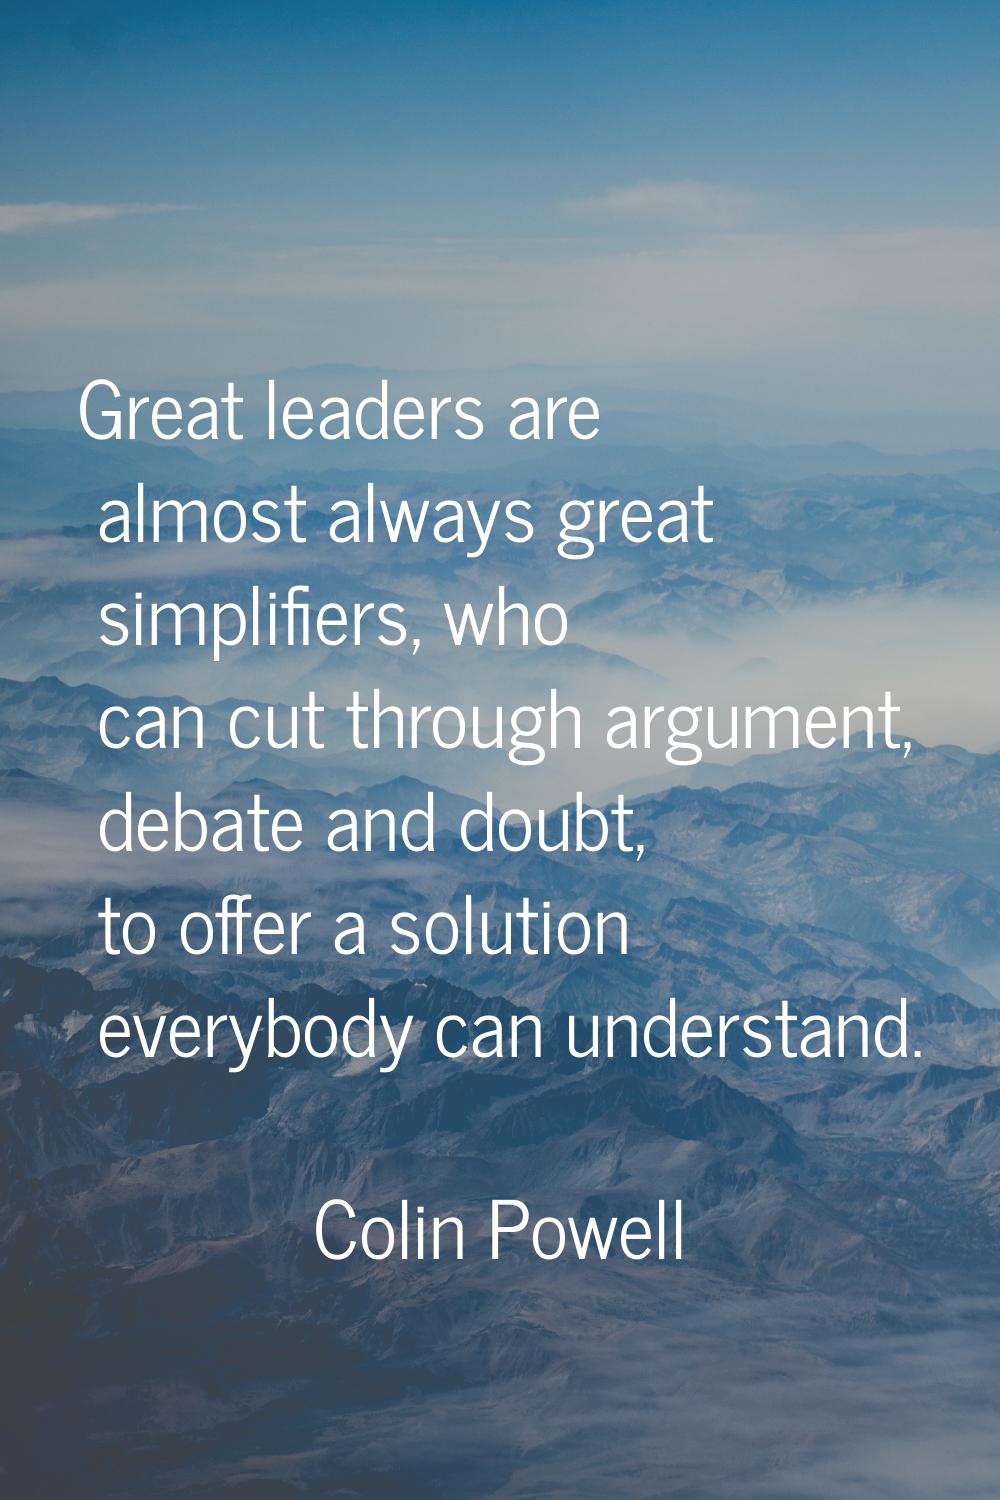 Great leaders are almost always great simplifiers, who can cut through argument, debate and doubt, 